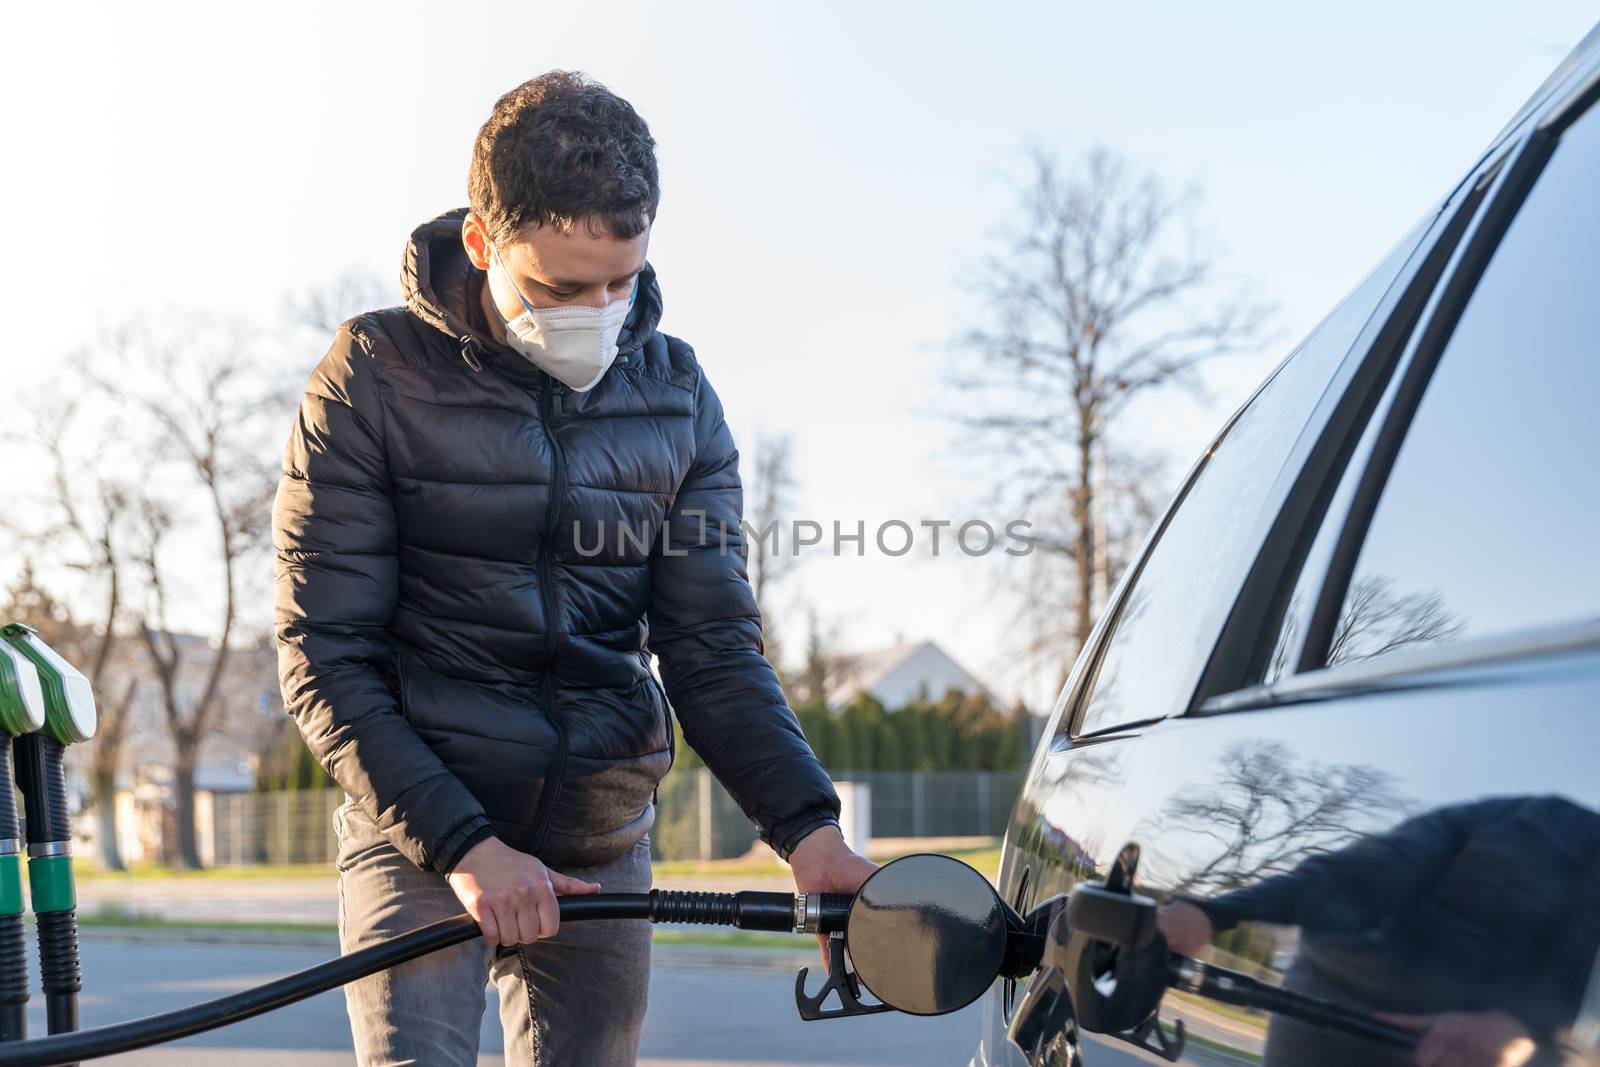 refueling the passenger car tank in times of crisis by Edophoto